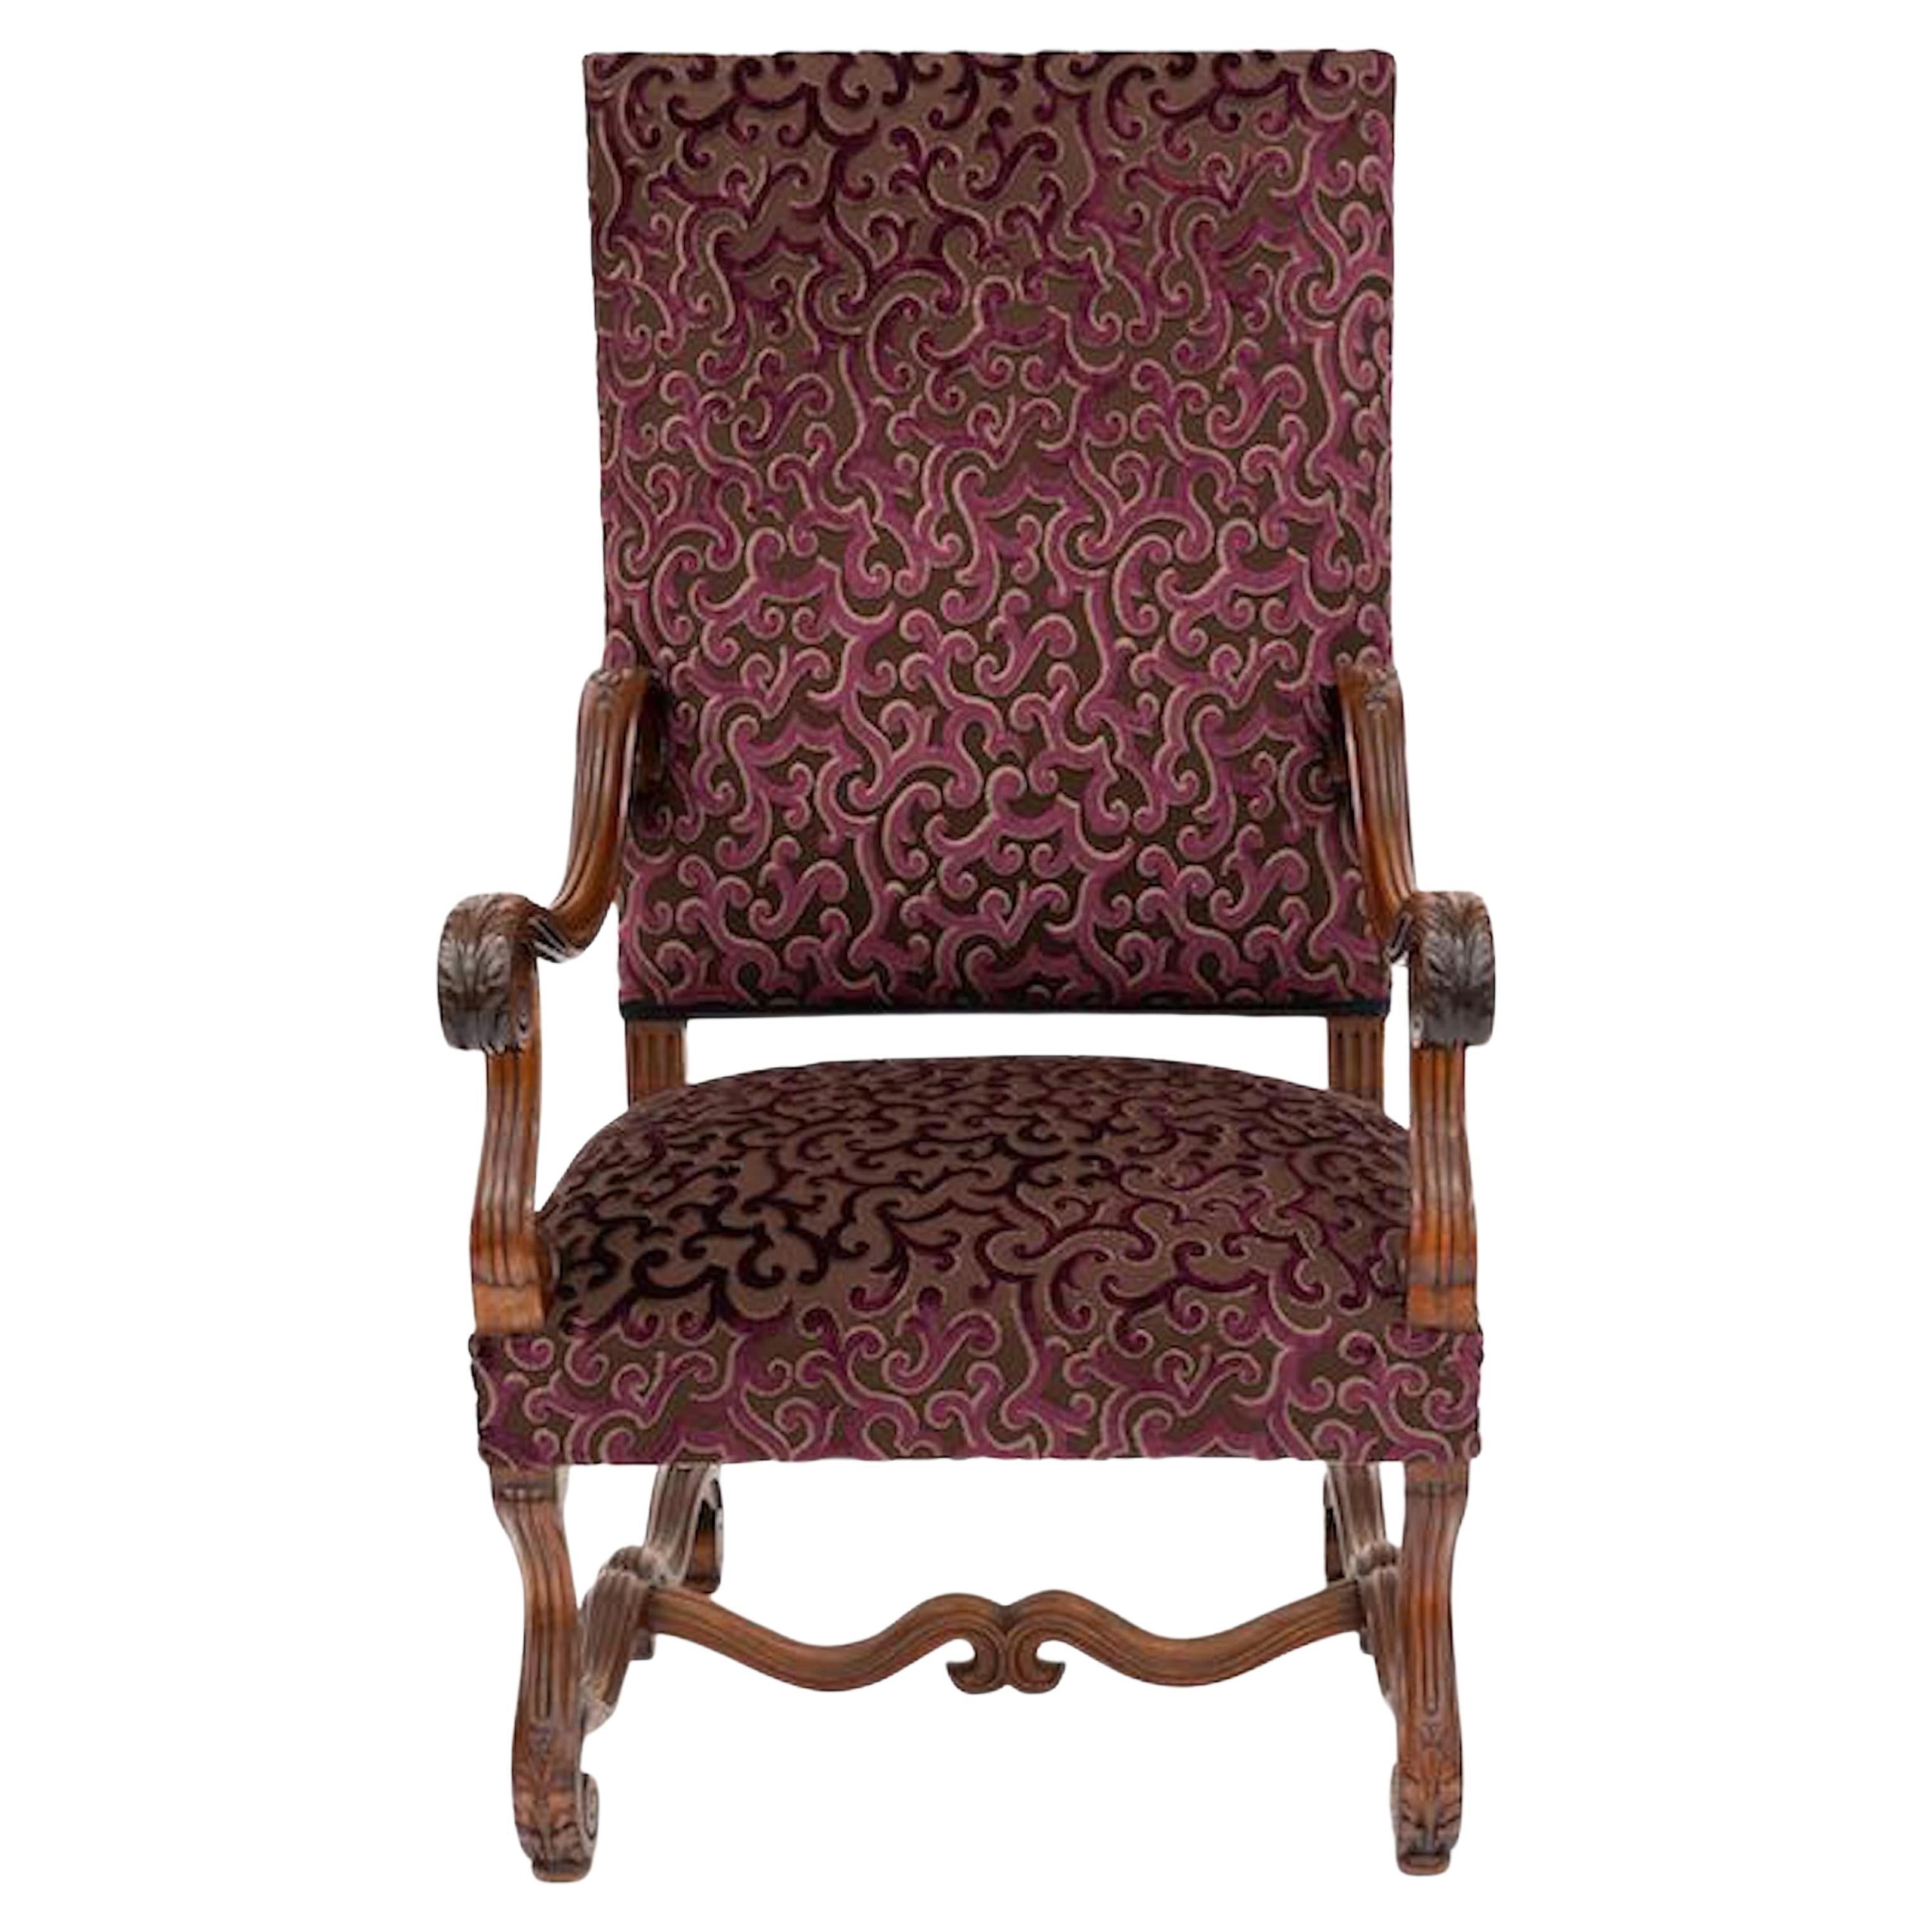 19th Century Louis XIV Style Walnut Fauteuil A La Reine

With a strong walnut frame and beautiful hand decorative carvings of acanthus on armrests and feet. The rectangular seat is raised on cabriole legs joined by a serpentine H-shaped stretcher